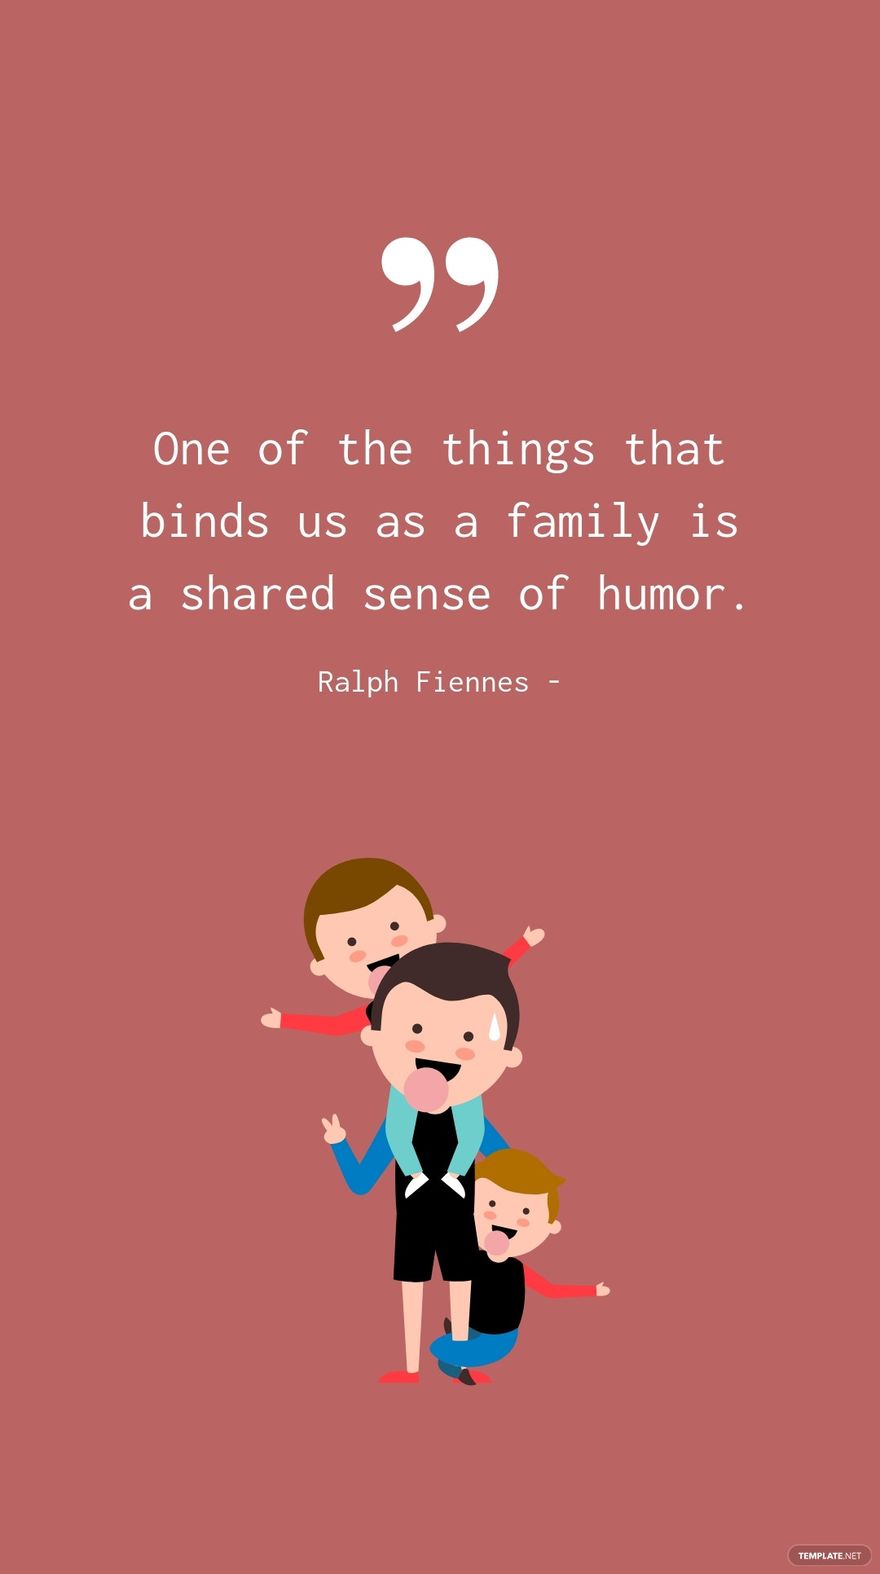 Ralph Fiennes - One of the things that binds us as a family is a shared sense of humor.